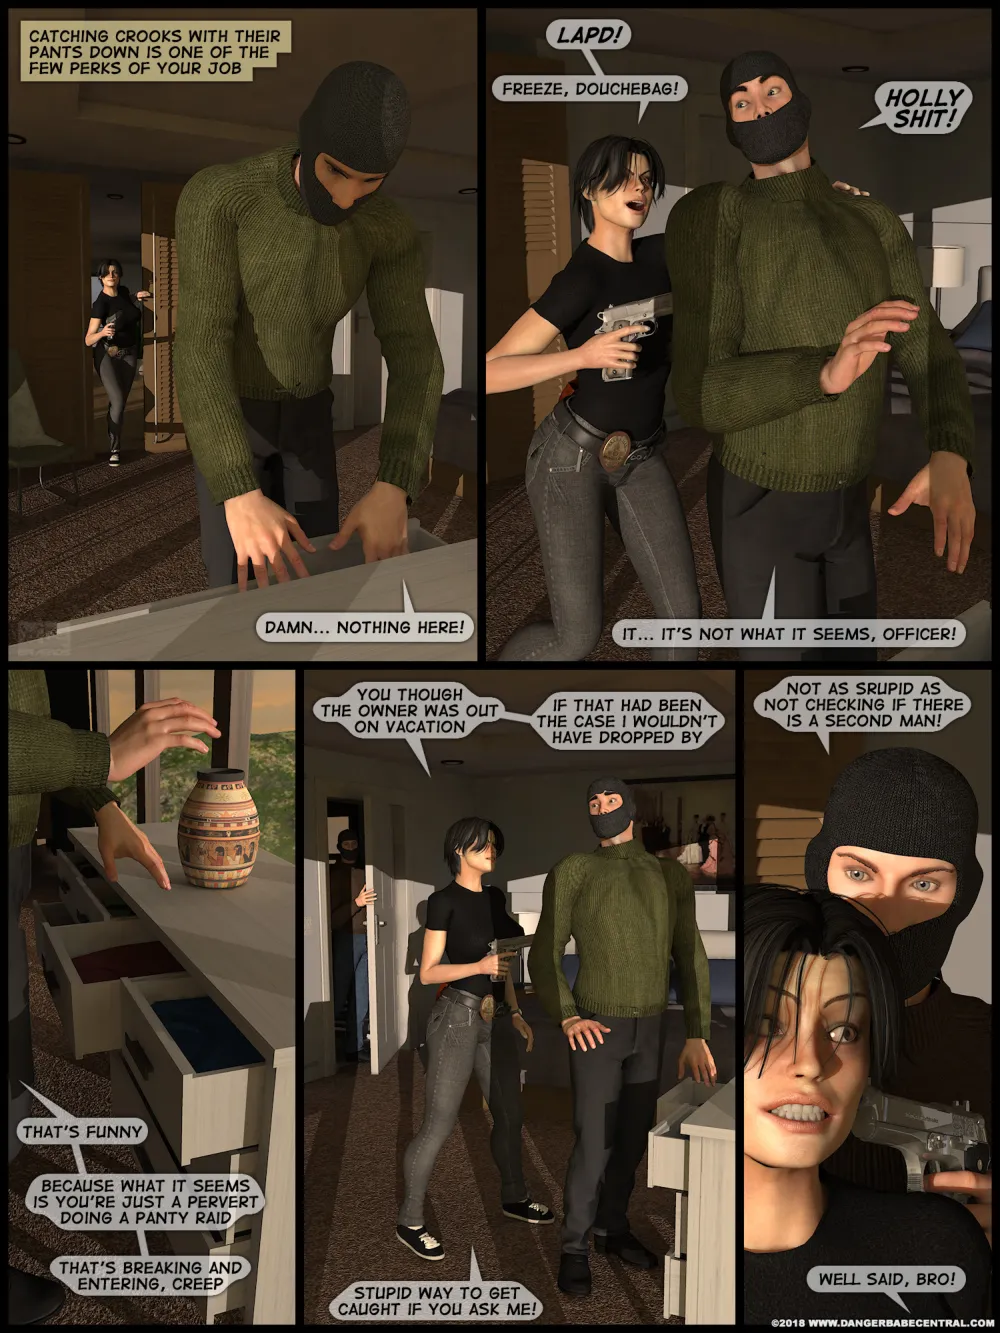 Mamba - The Most Dangerous Hunt - Page 8